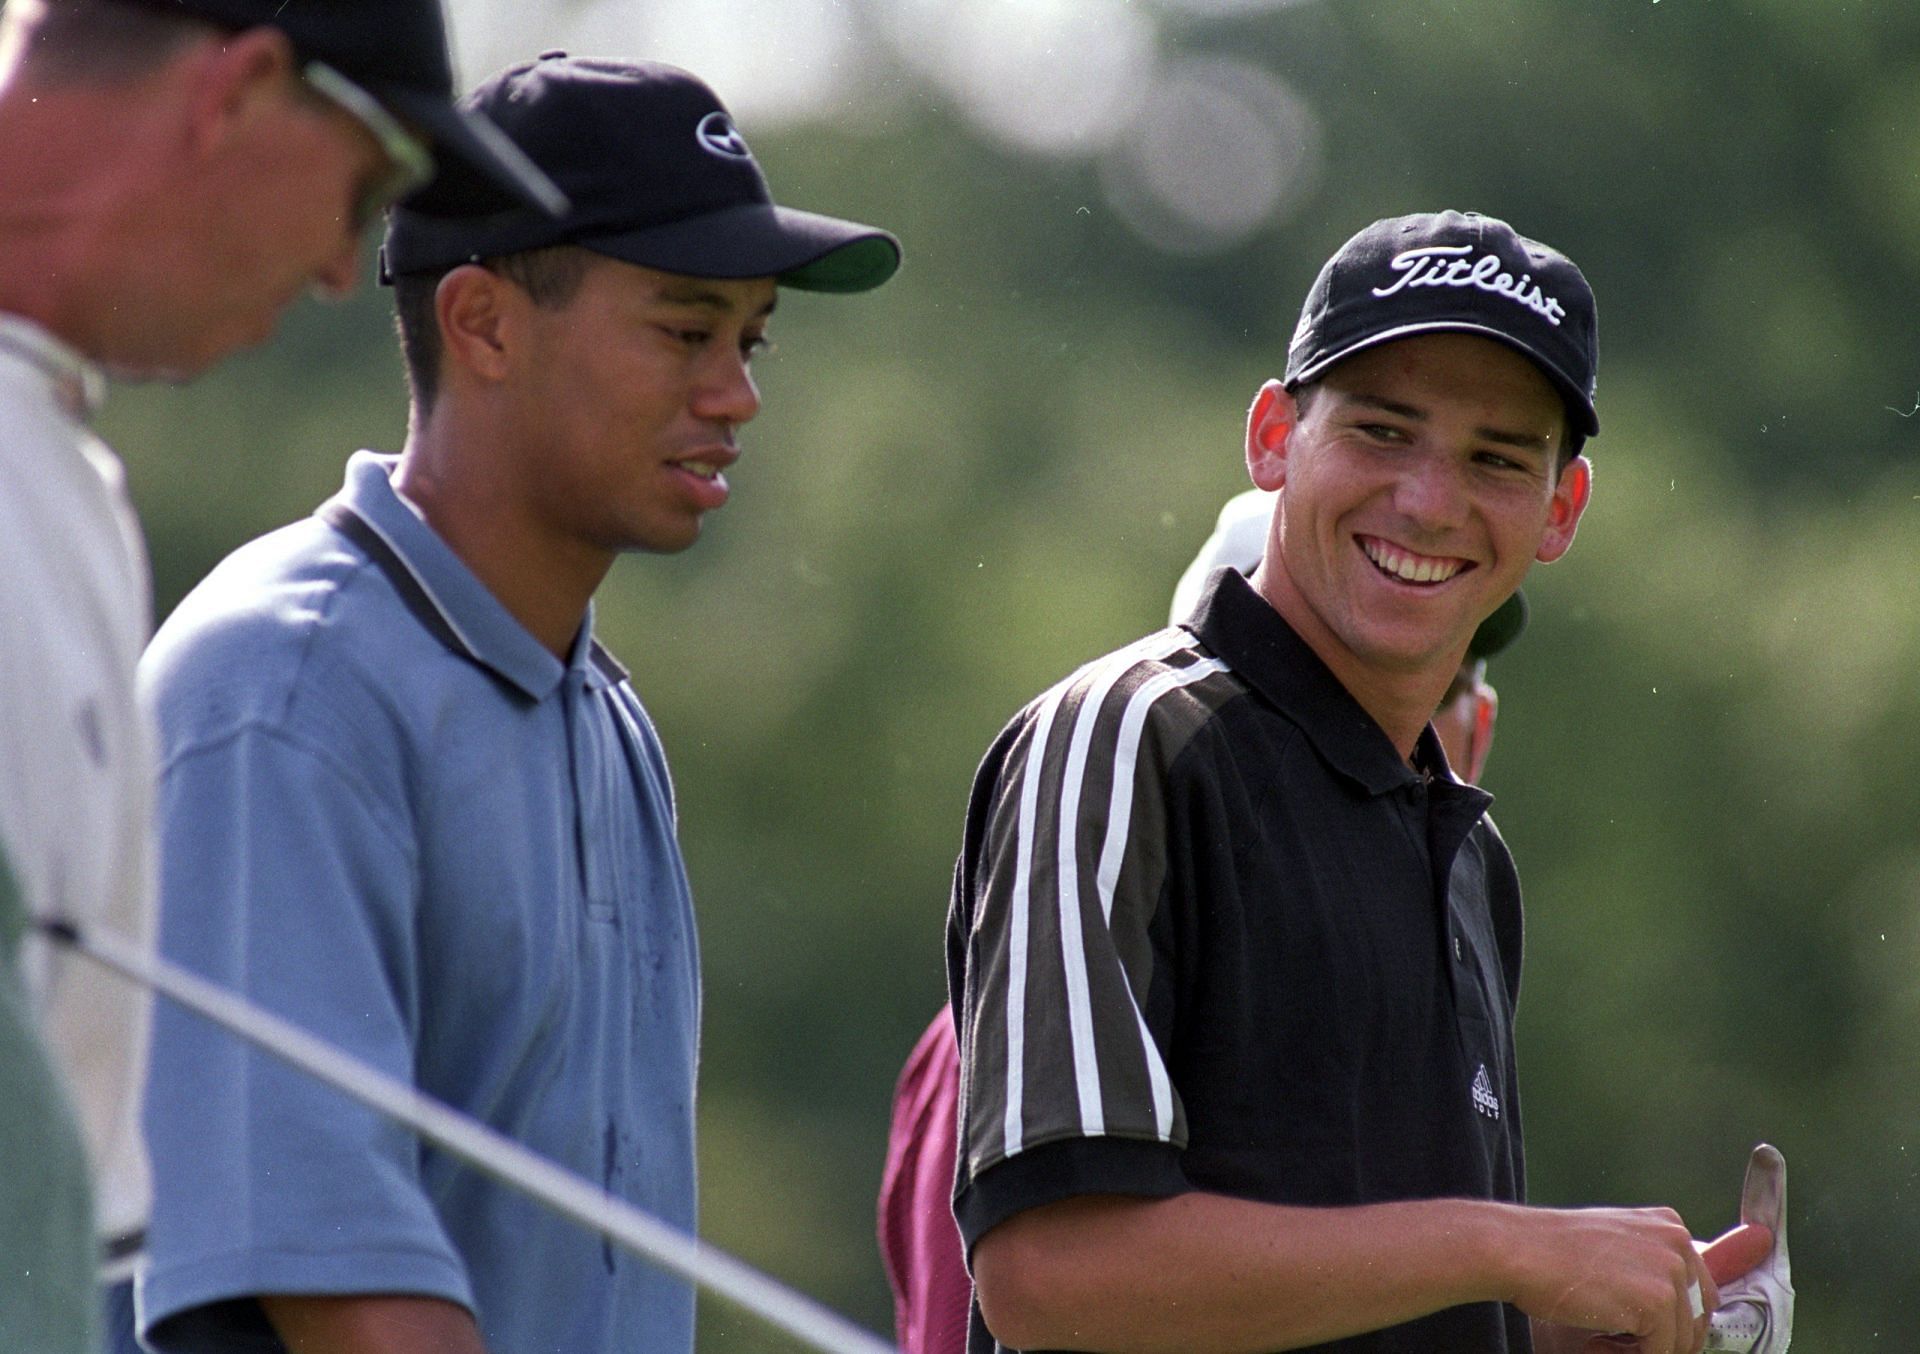 Tiger Woods and Sergio Garcia during one of the most memorable moments on the PGA Tour. 1999. (image via Getty).